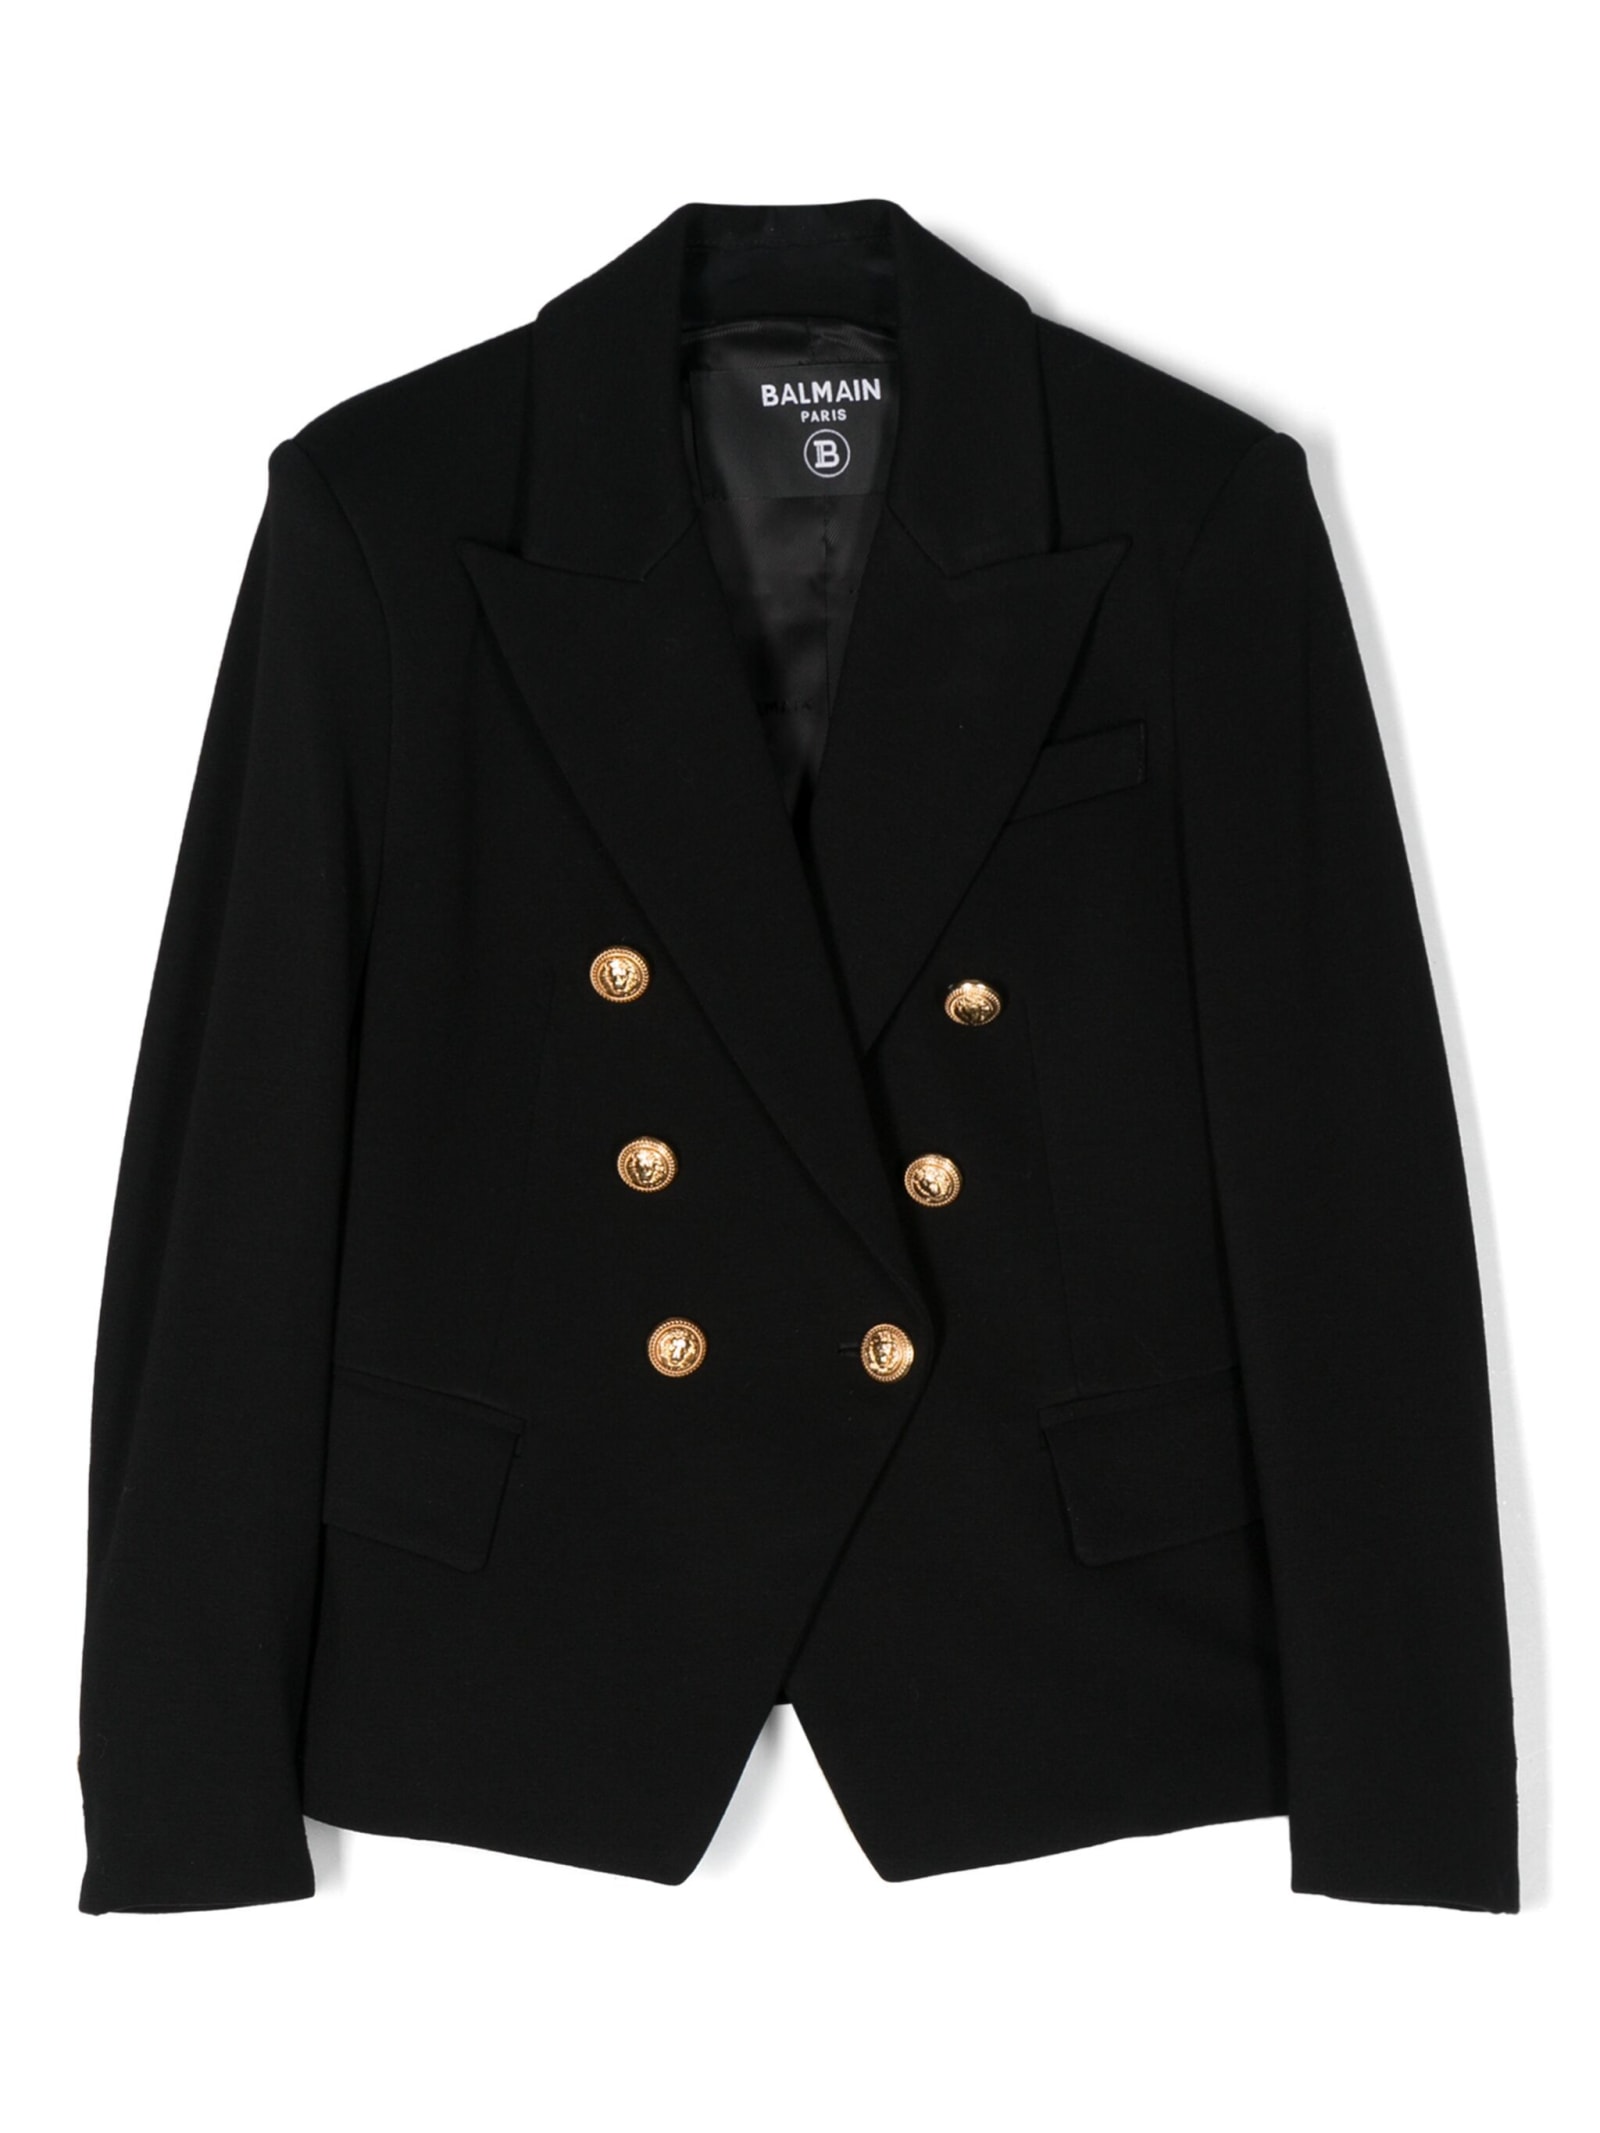 Balmain Kids' Black Double-breasted Blazer With Gold Buttons